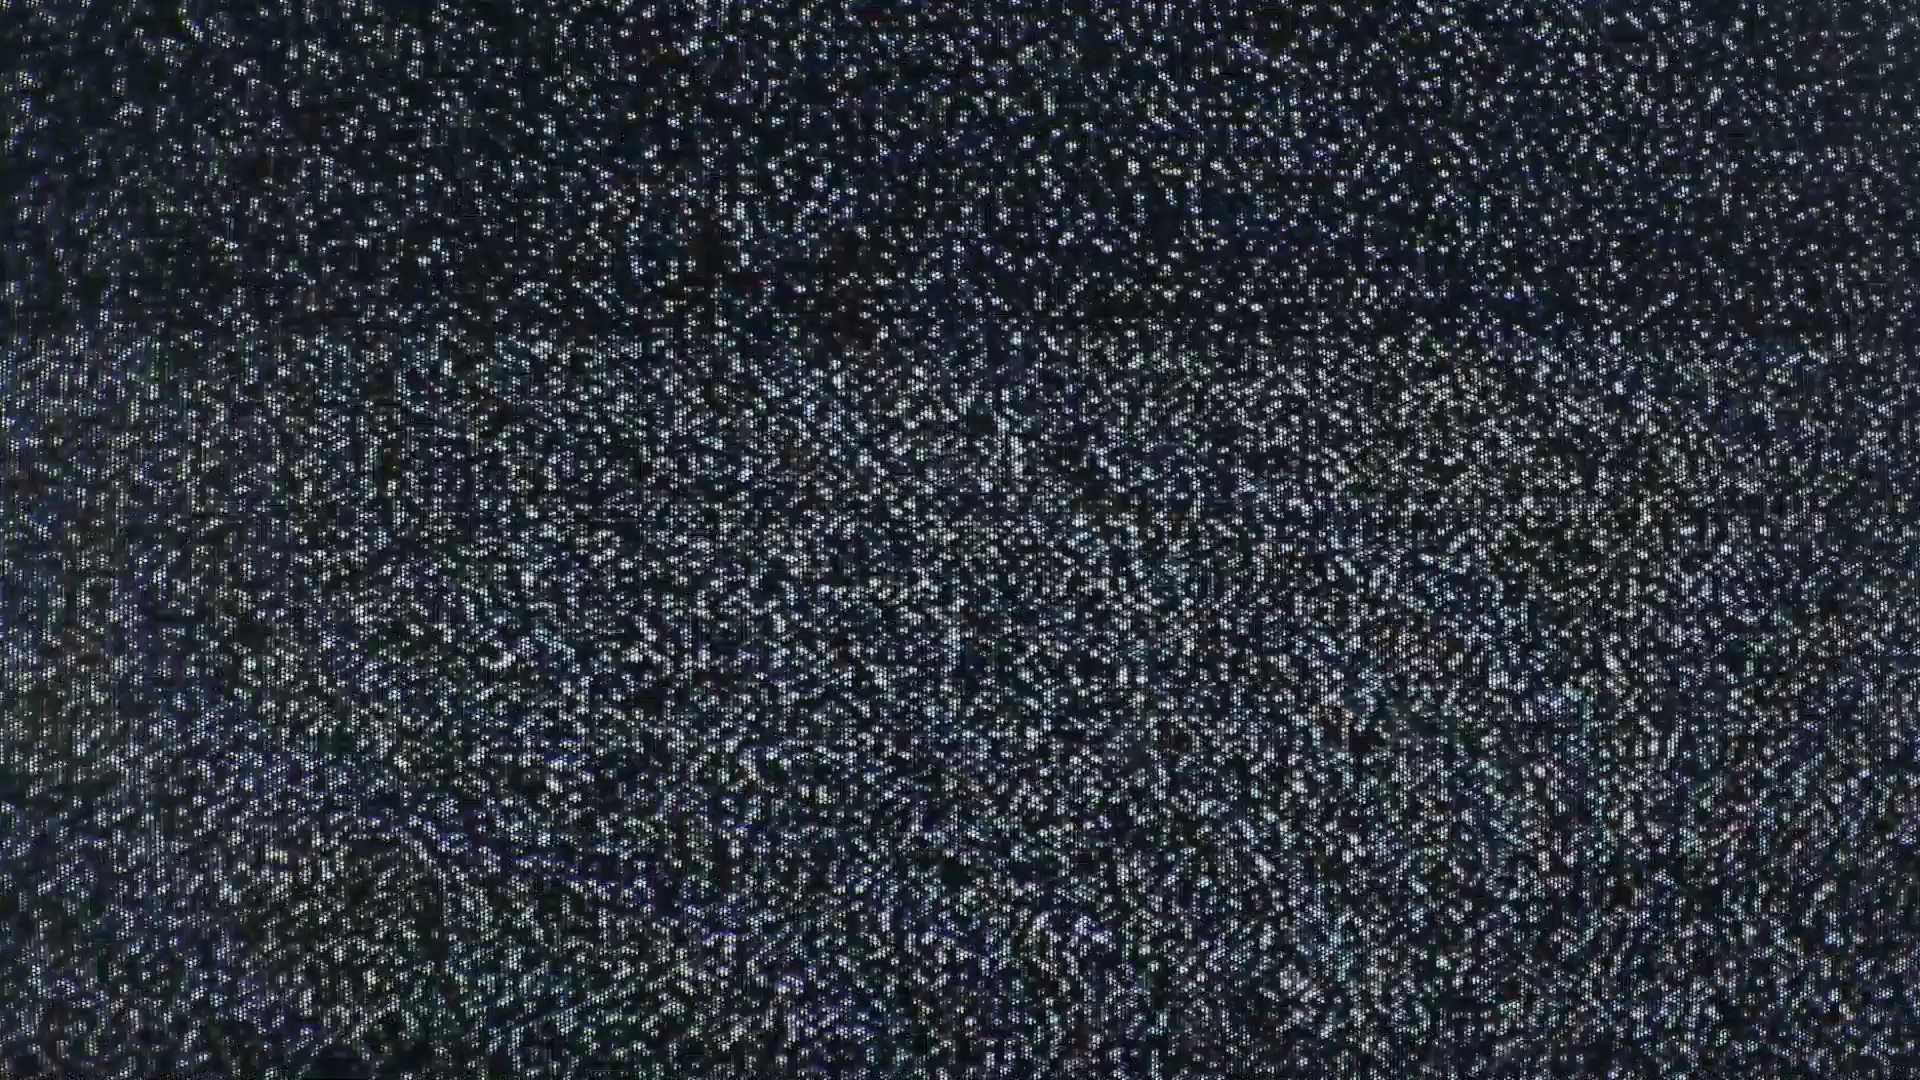 1920x1080 Tv noise pollution grains. Static grainy noise from an old analog tv  screen. Bad signal, weak reception, digital pollution. Real footage.